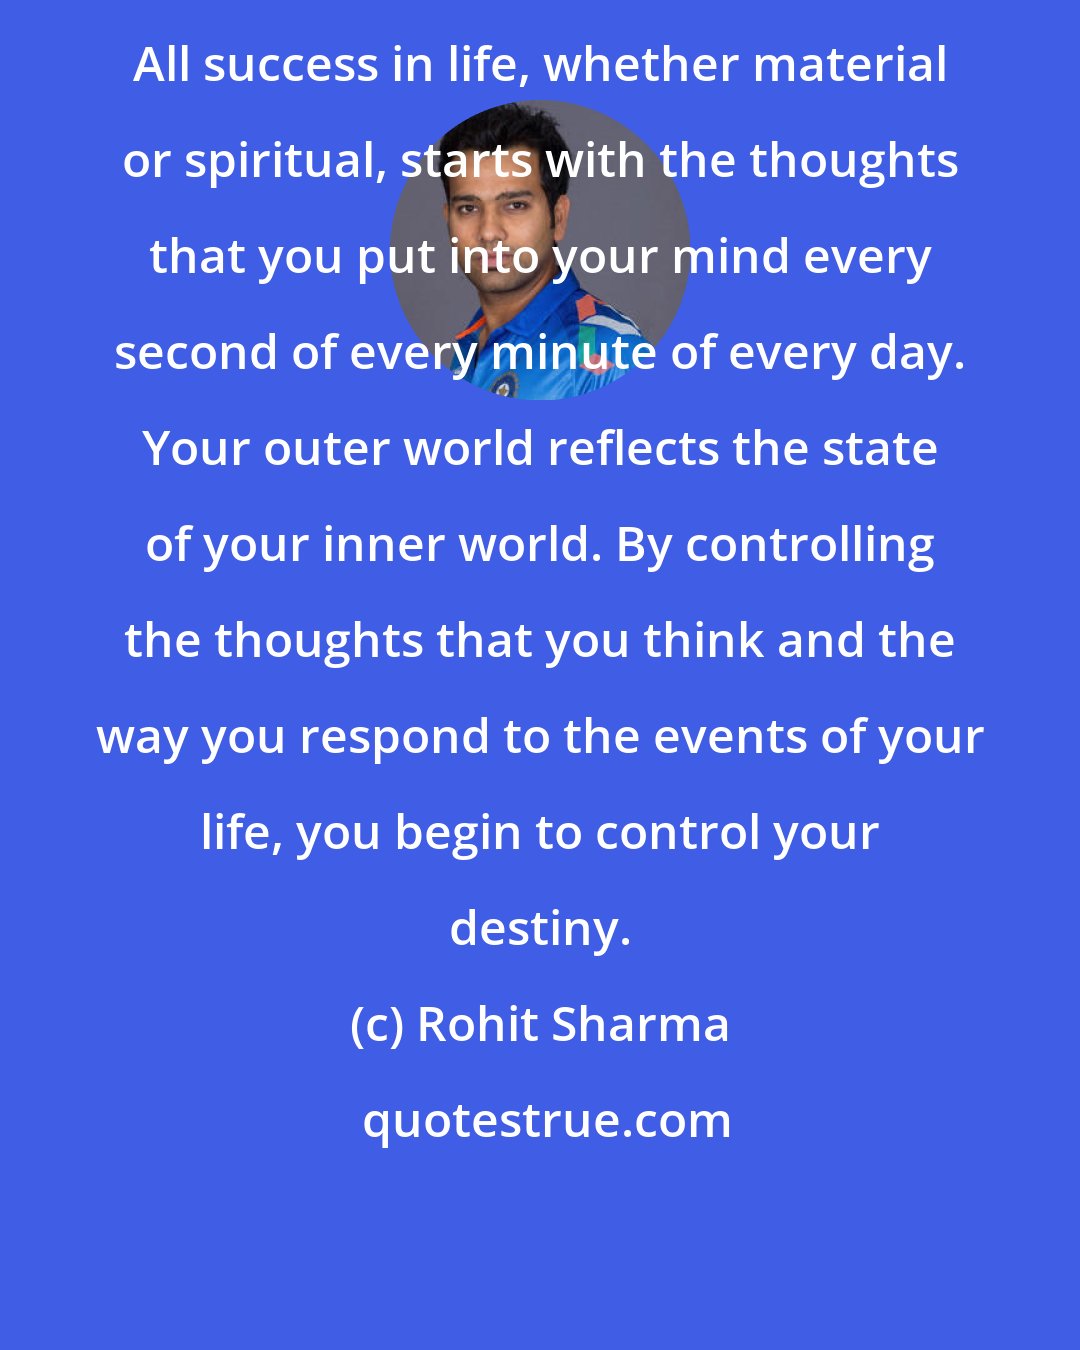 Rohit Sharma: All success in life, whether material or spiritual, starts with the thoughts that you put into your mind every second of every minute of every day. Your outer world reflects the state of your inner world. By controlling the thoughts that you think and the way you respond to the events of your life, you begin to control your destiny.